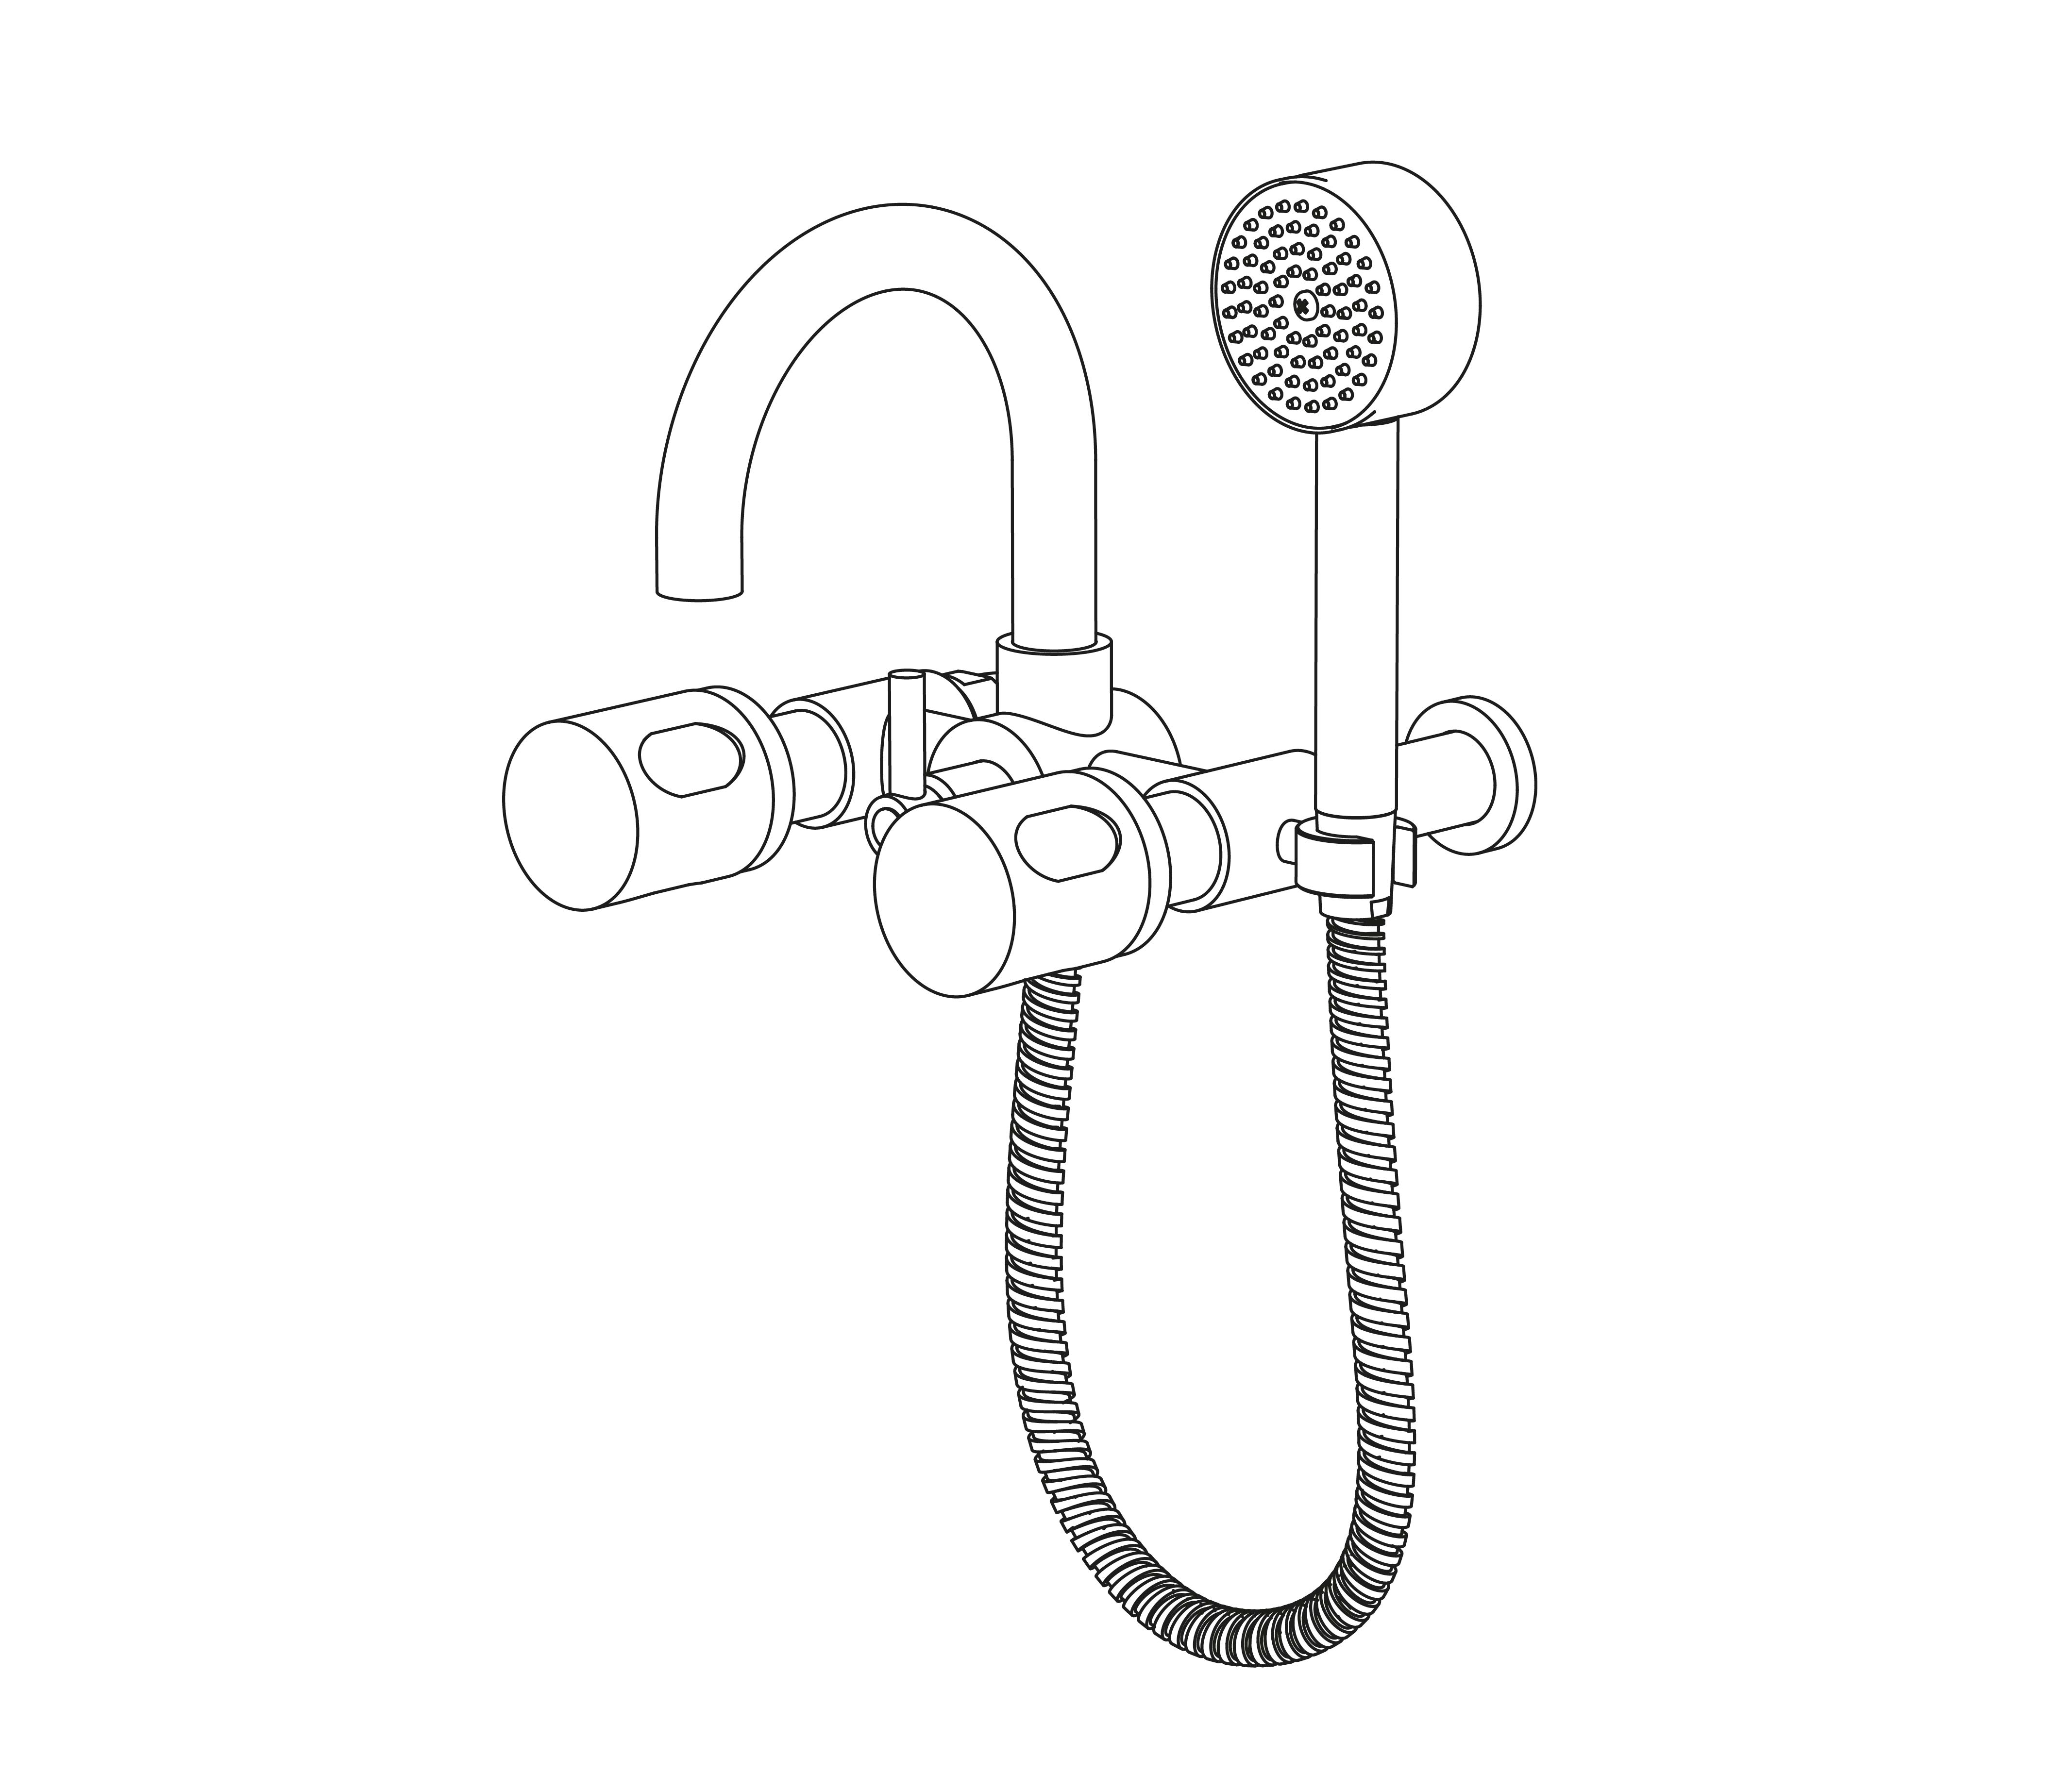 C22-3201 Wall mounted bath and shower mixer